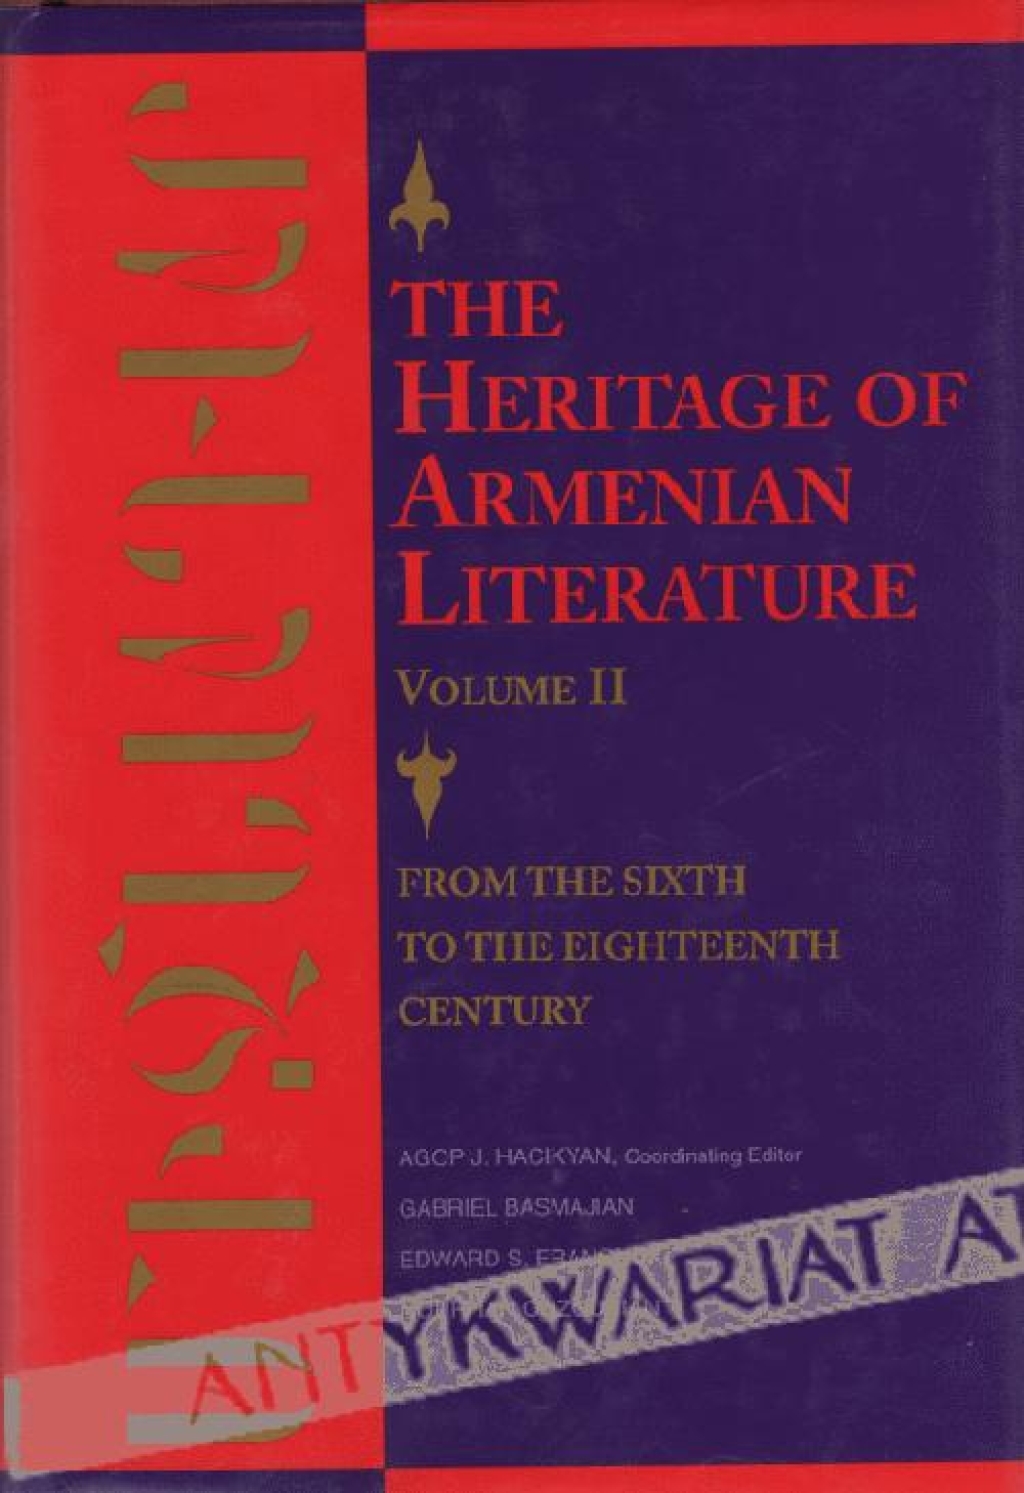 The Heritage of Armenian Literature, volume II:
From the Sixth to the Eighteenth Century